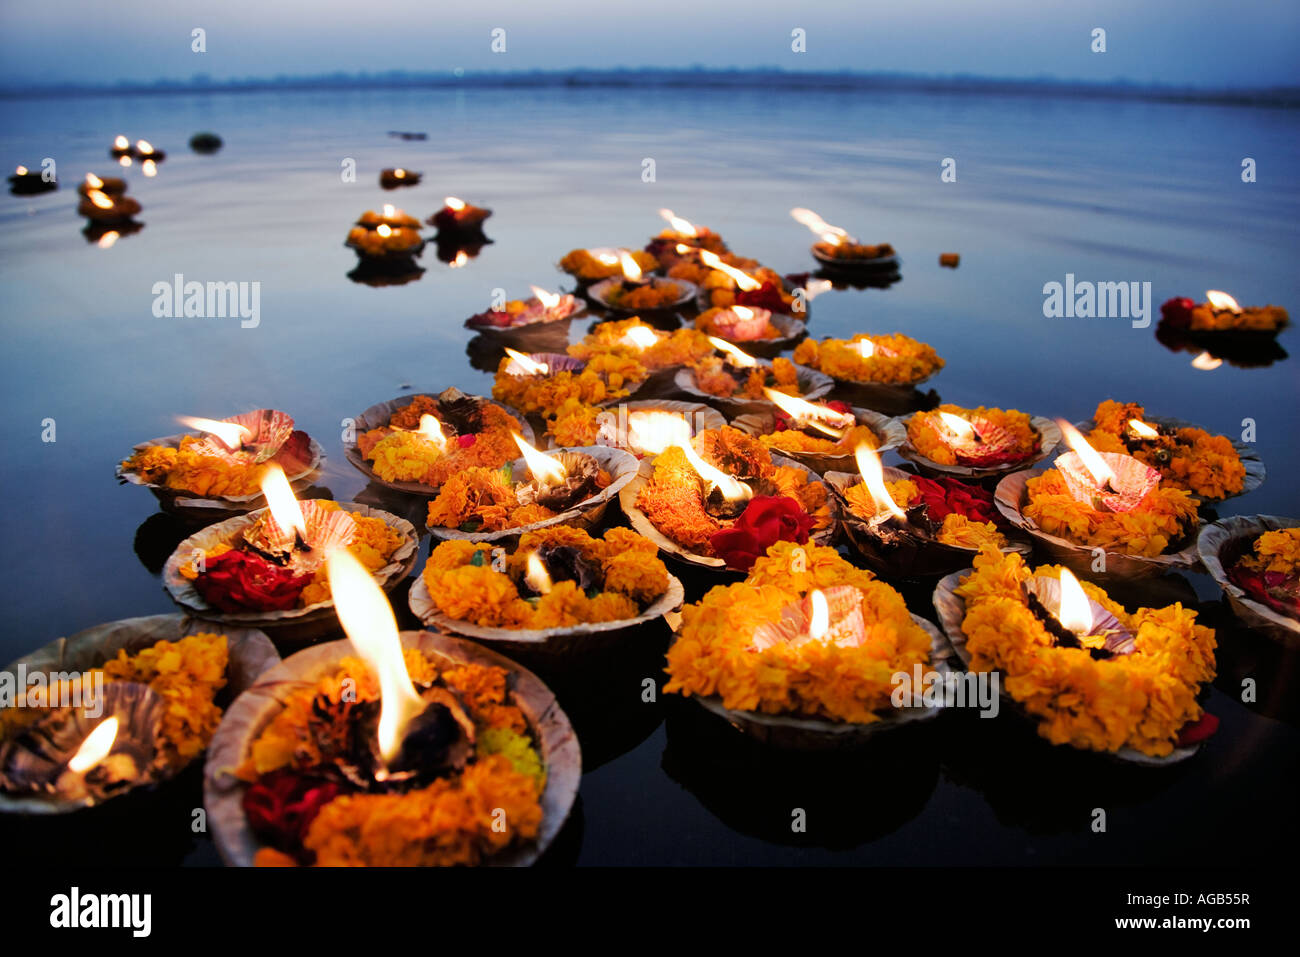 Deepak in the Ganges River The deepak or oil lamps are used as an offering to the Ganges River Varanasi India Stock Photo